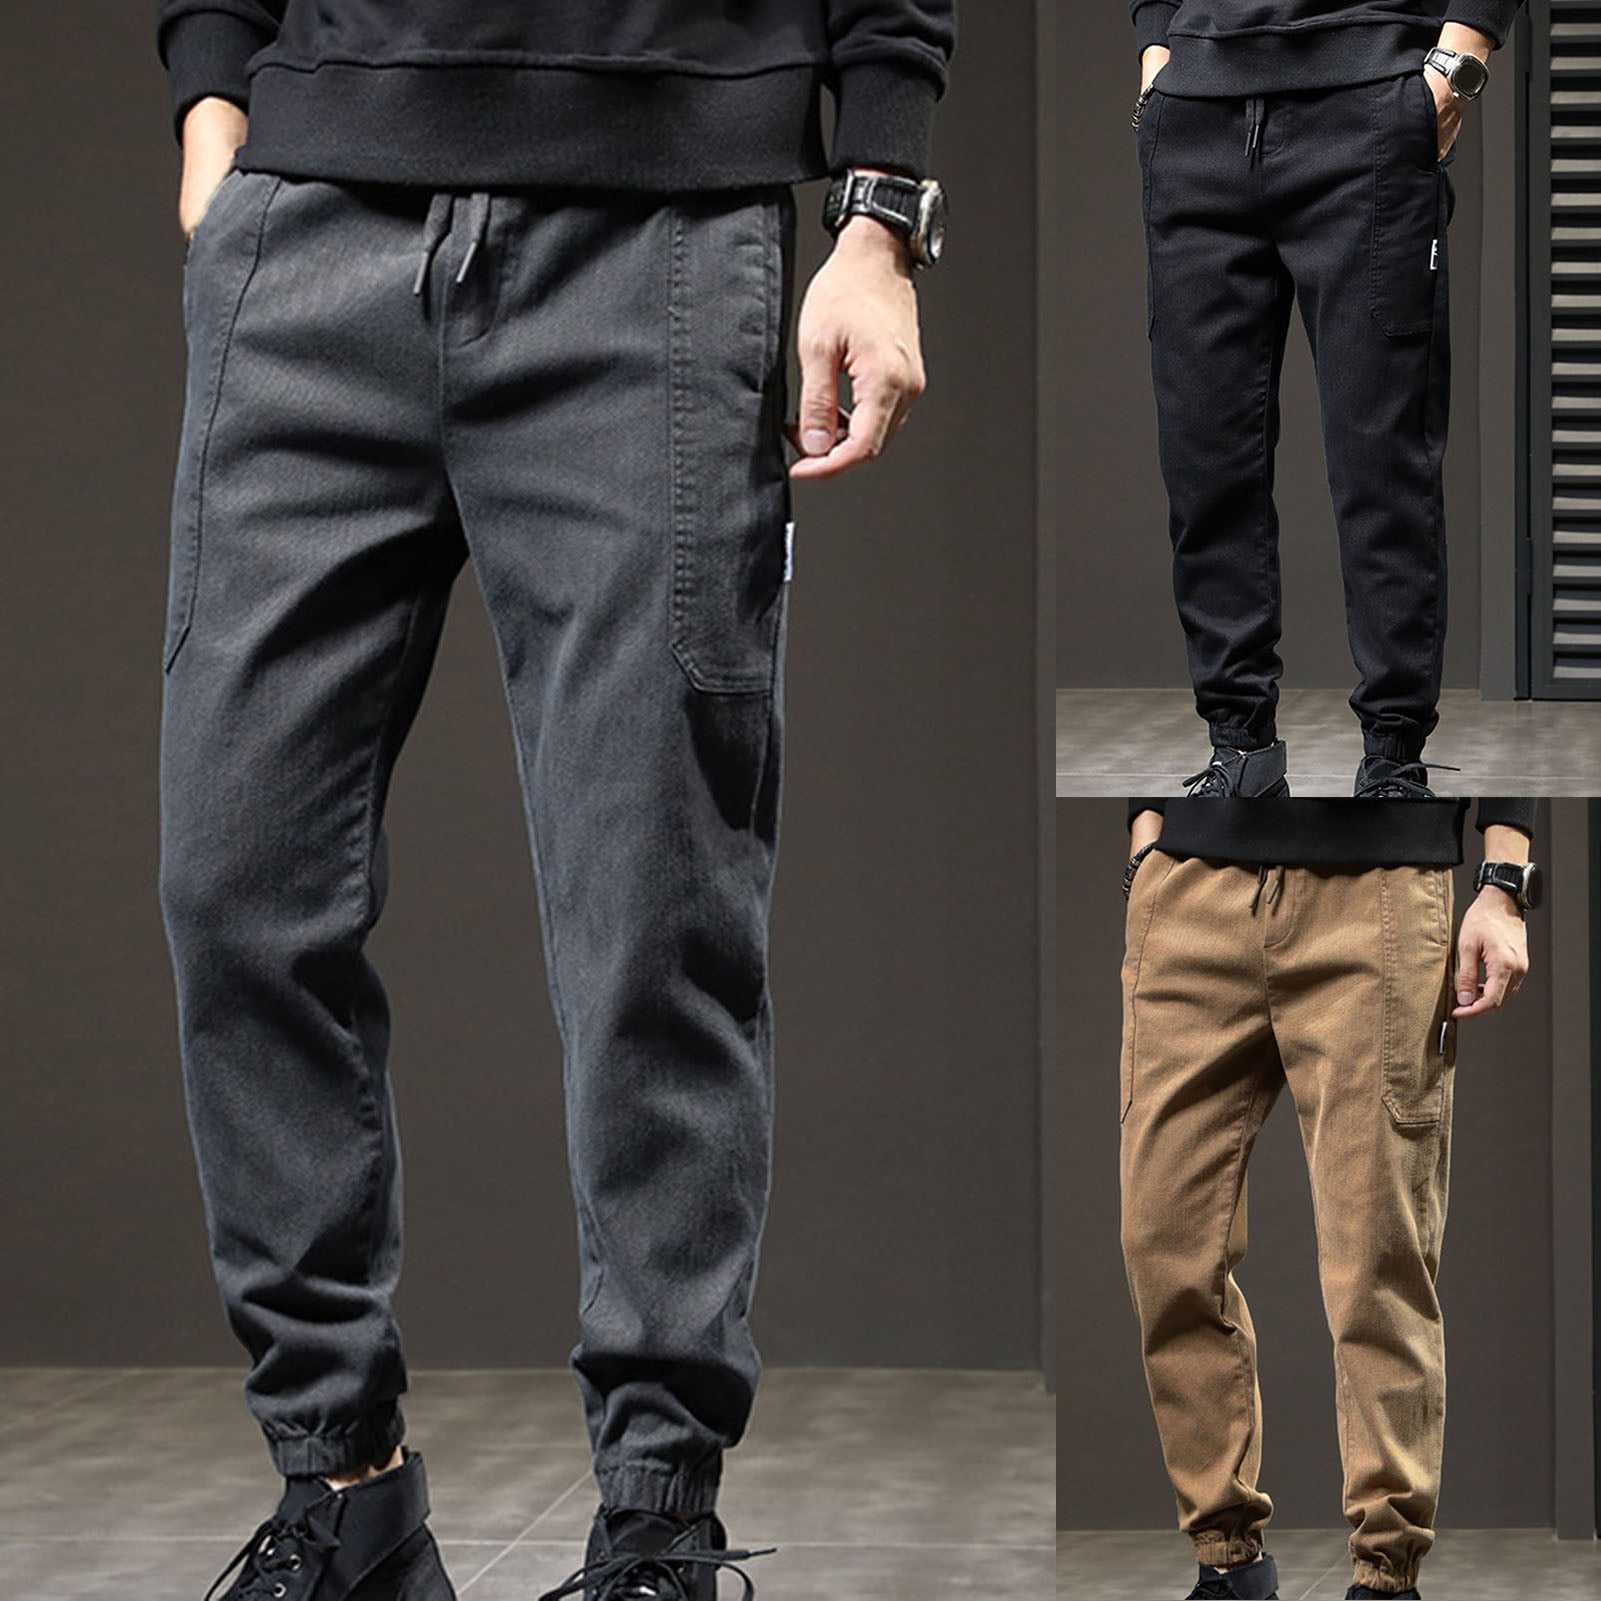 Domple Mens Color Block Multi-Pockets Harem Elastic Waisted Casual Cargo Pants 